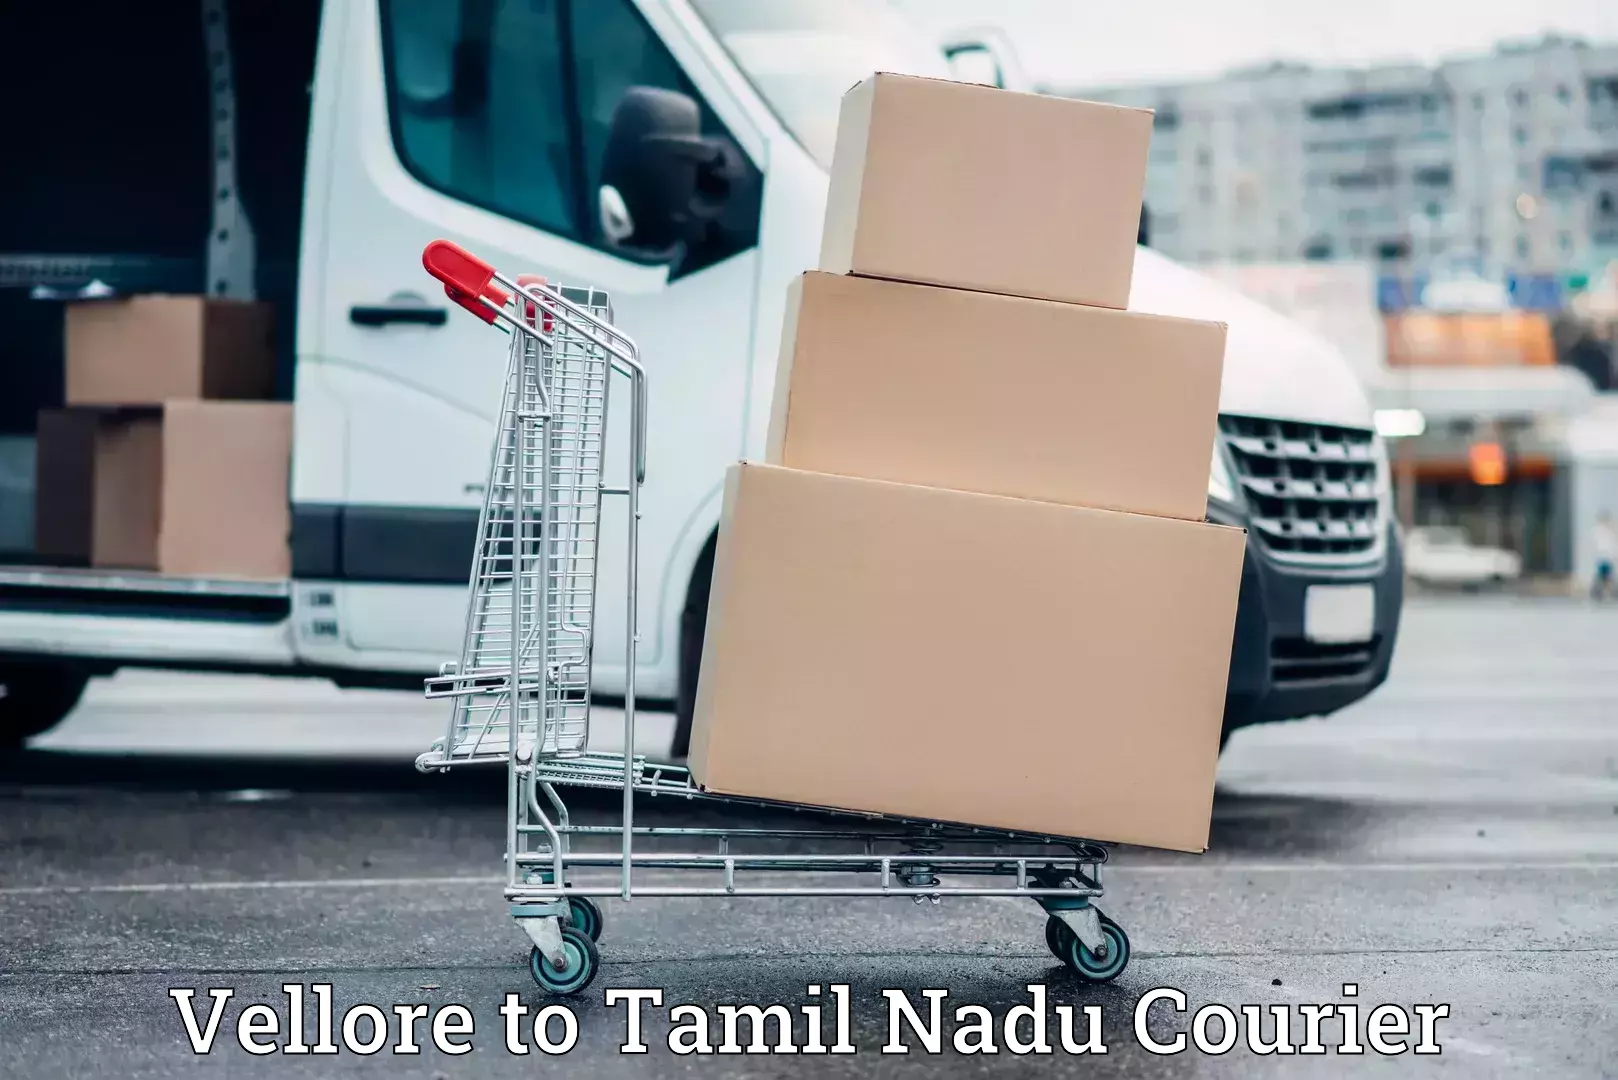 Quality moving company Vellore to Tamil Nadu